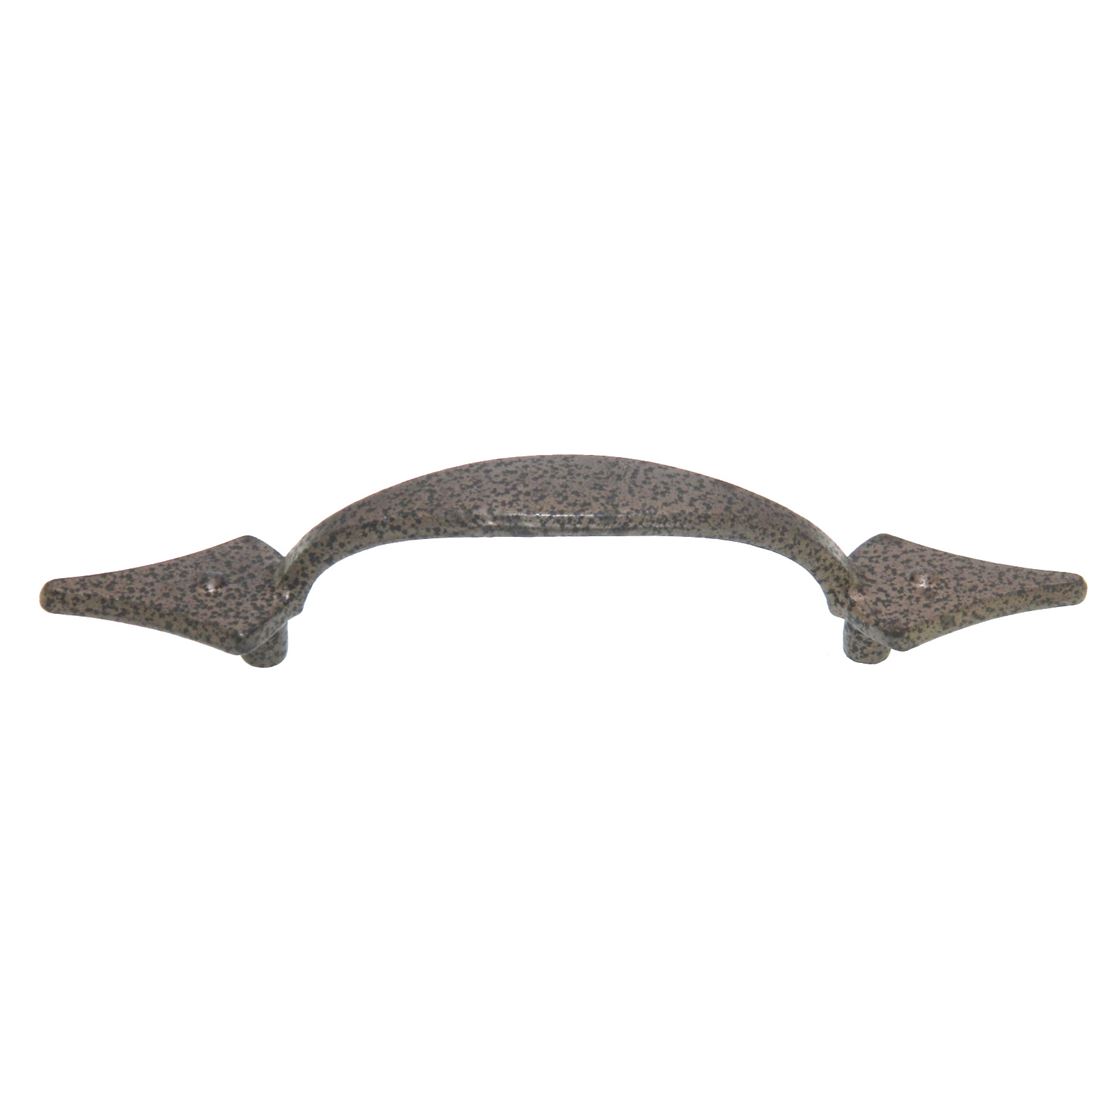 Amerock Shenandoah Hammered Bronze 3" Ctr. Pointed Cabinet Arch Pull BP302-HBZ